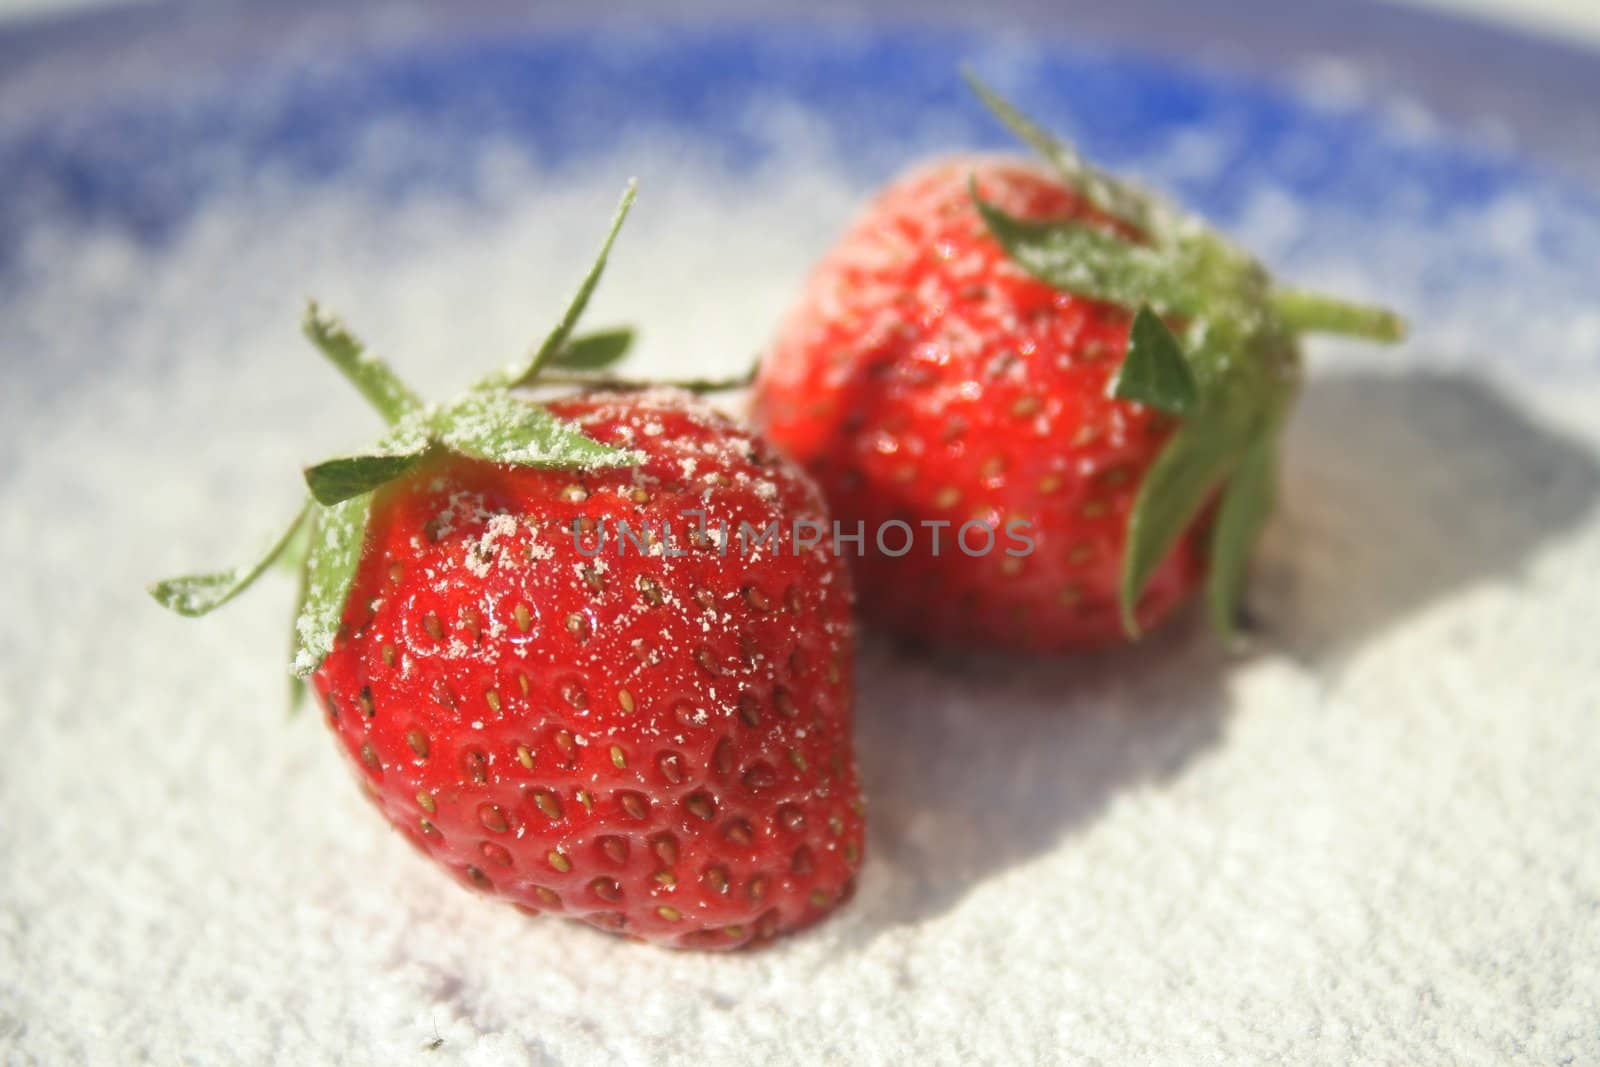 Two ripe red strawberries on blue plate with powered sugar sprinkled on them